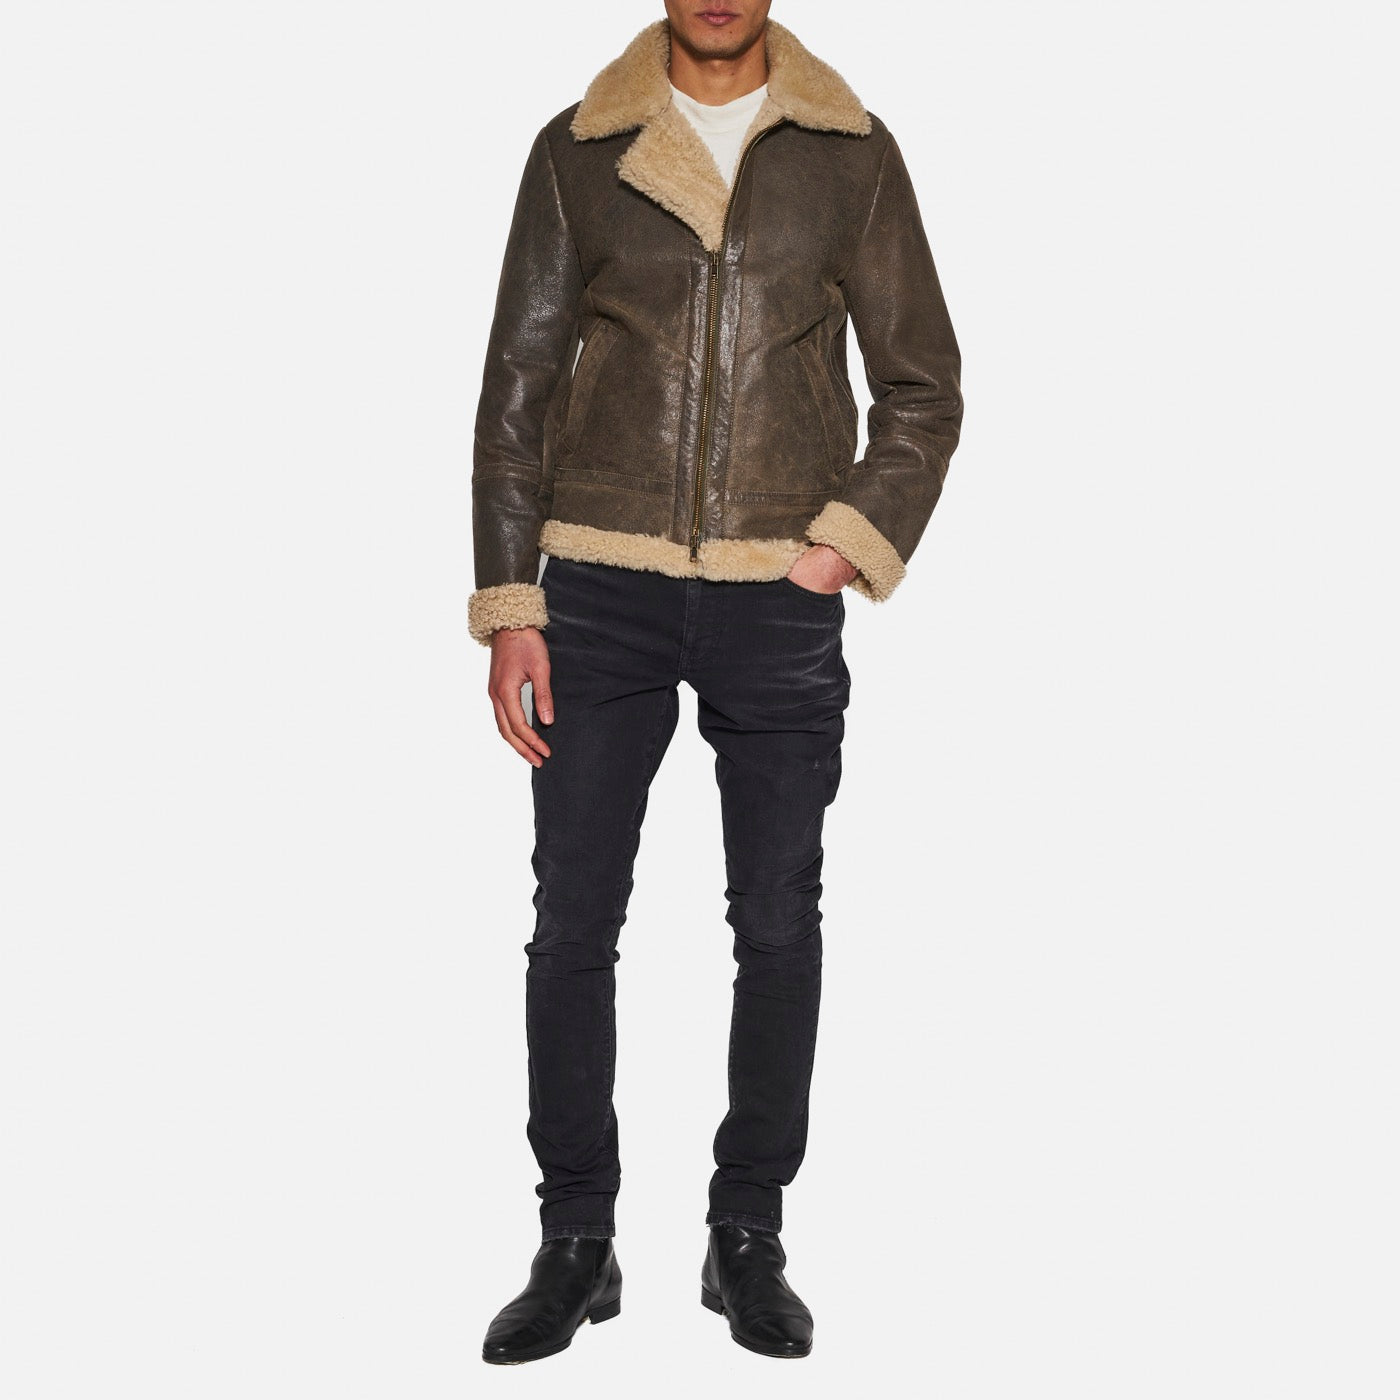 GIACCA IN SHEARLING - OLIVE